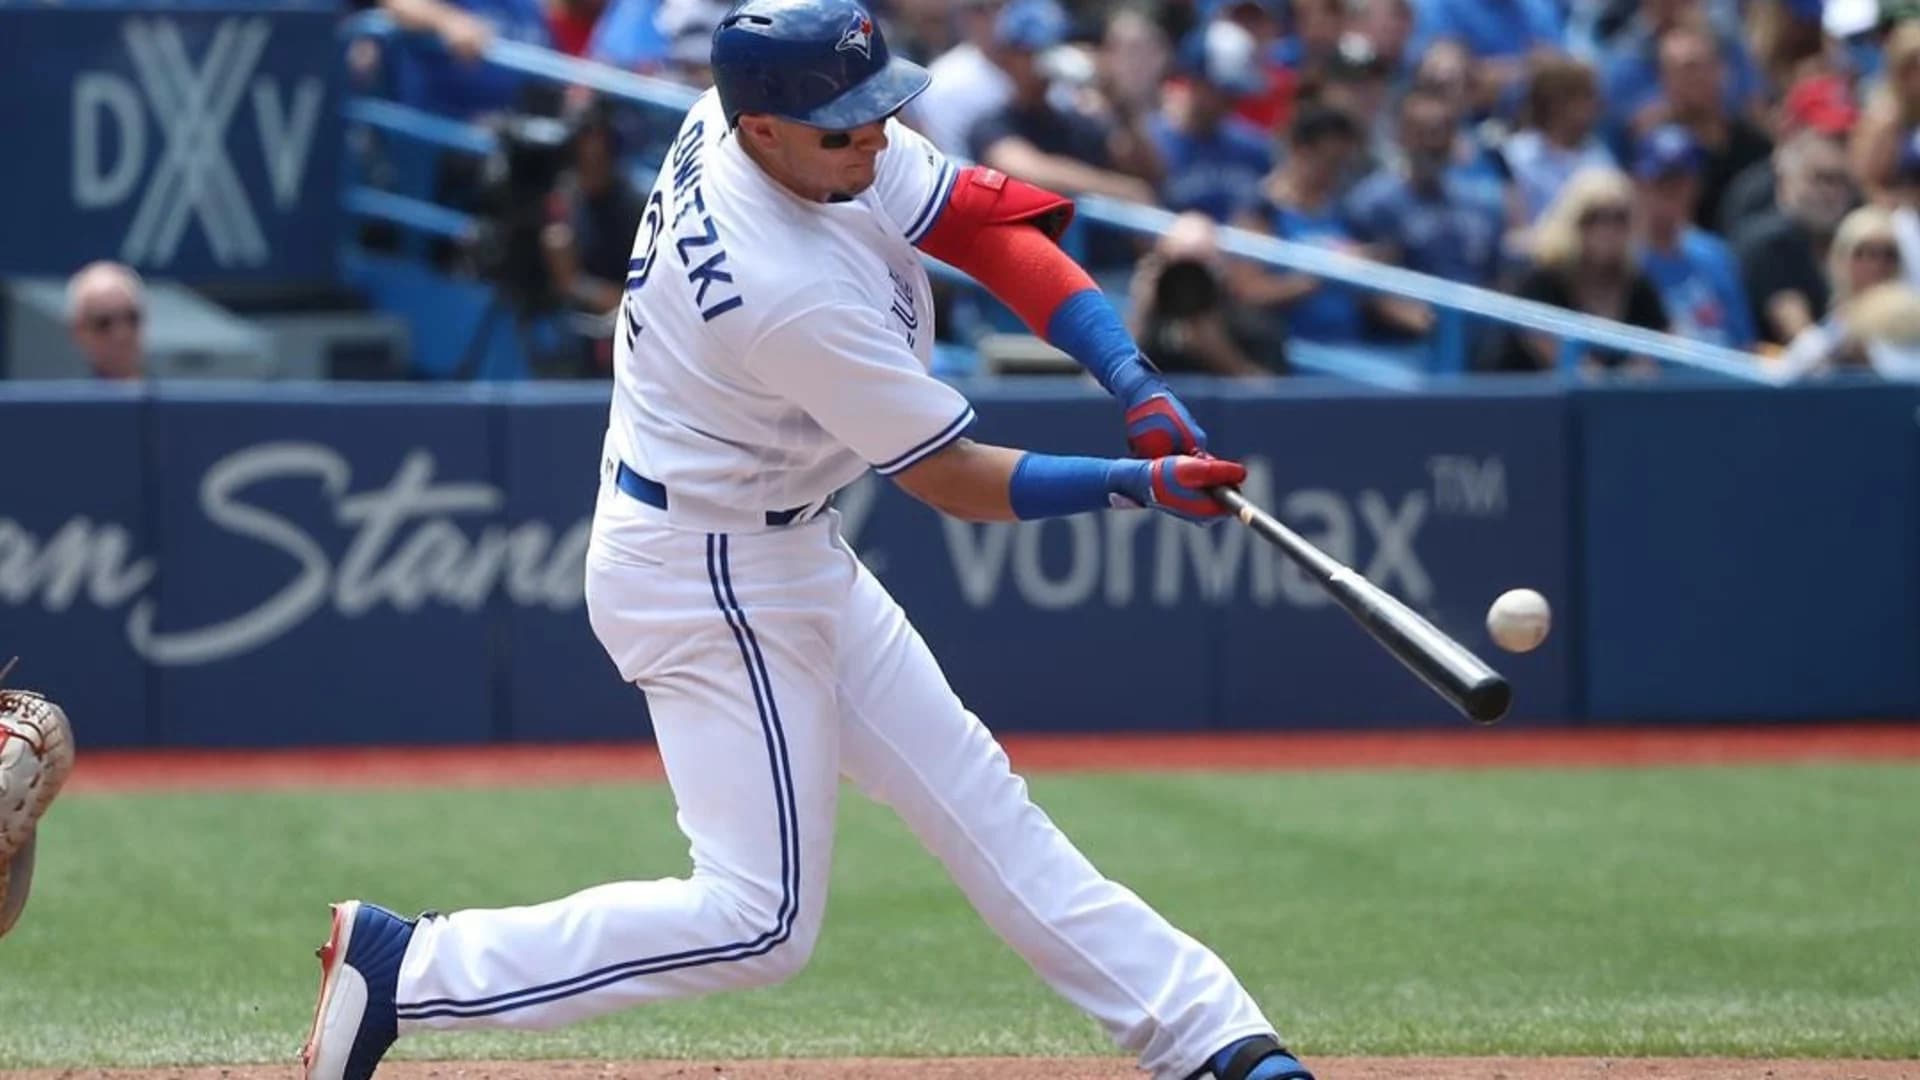 AP source: Tulowitzki agrees to 1-year deal with Yankees